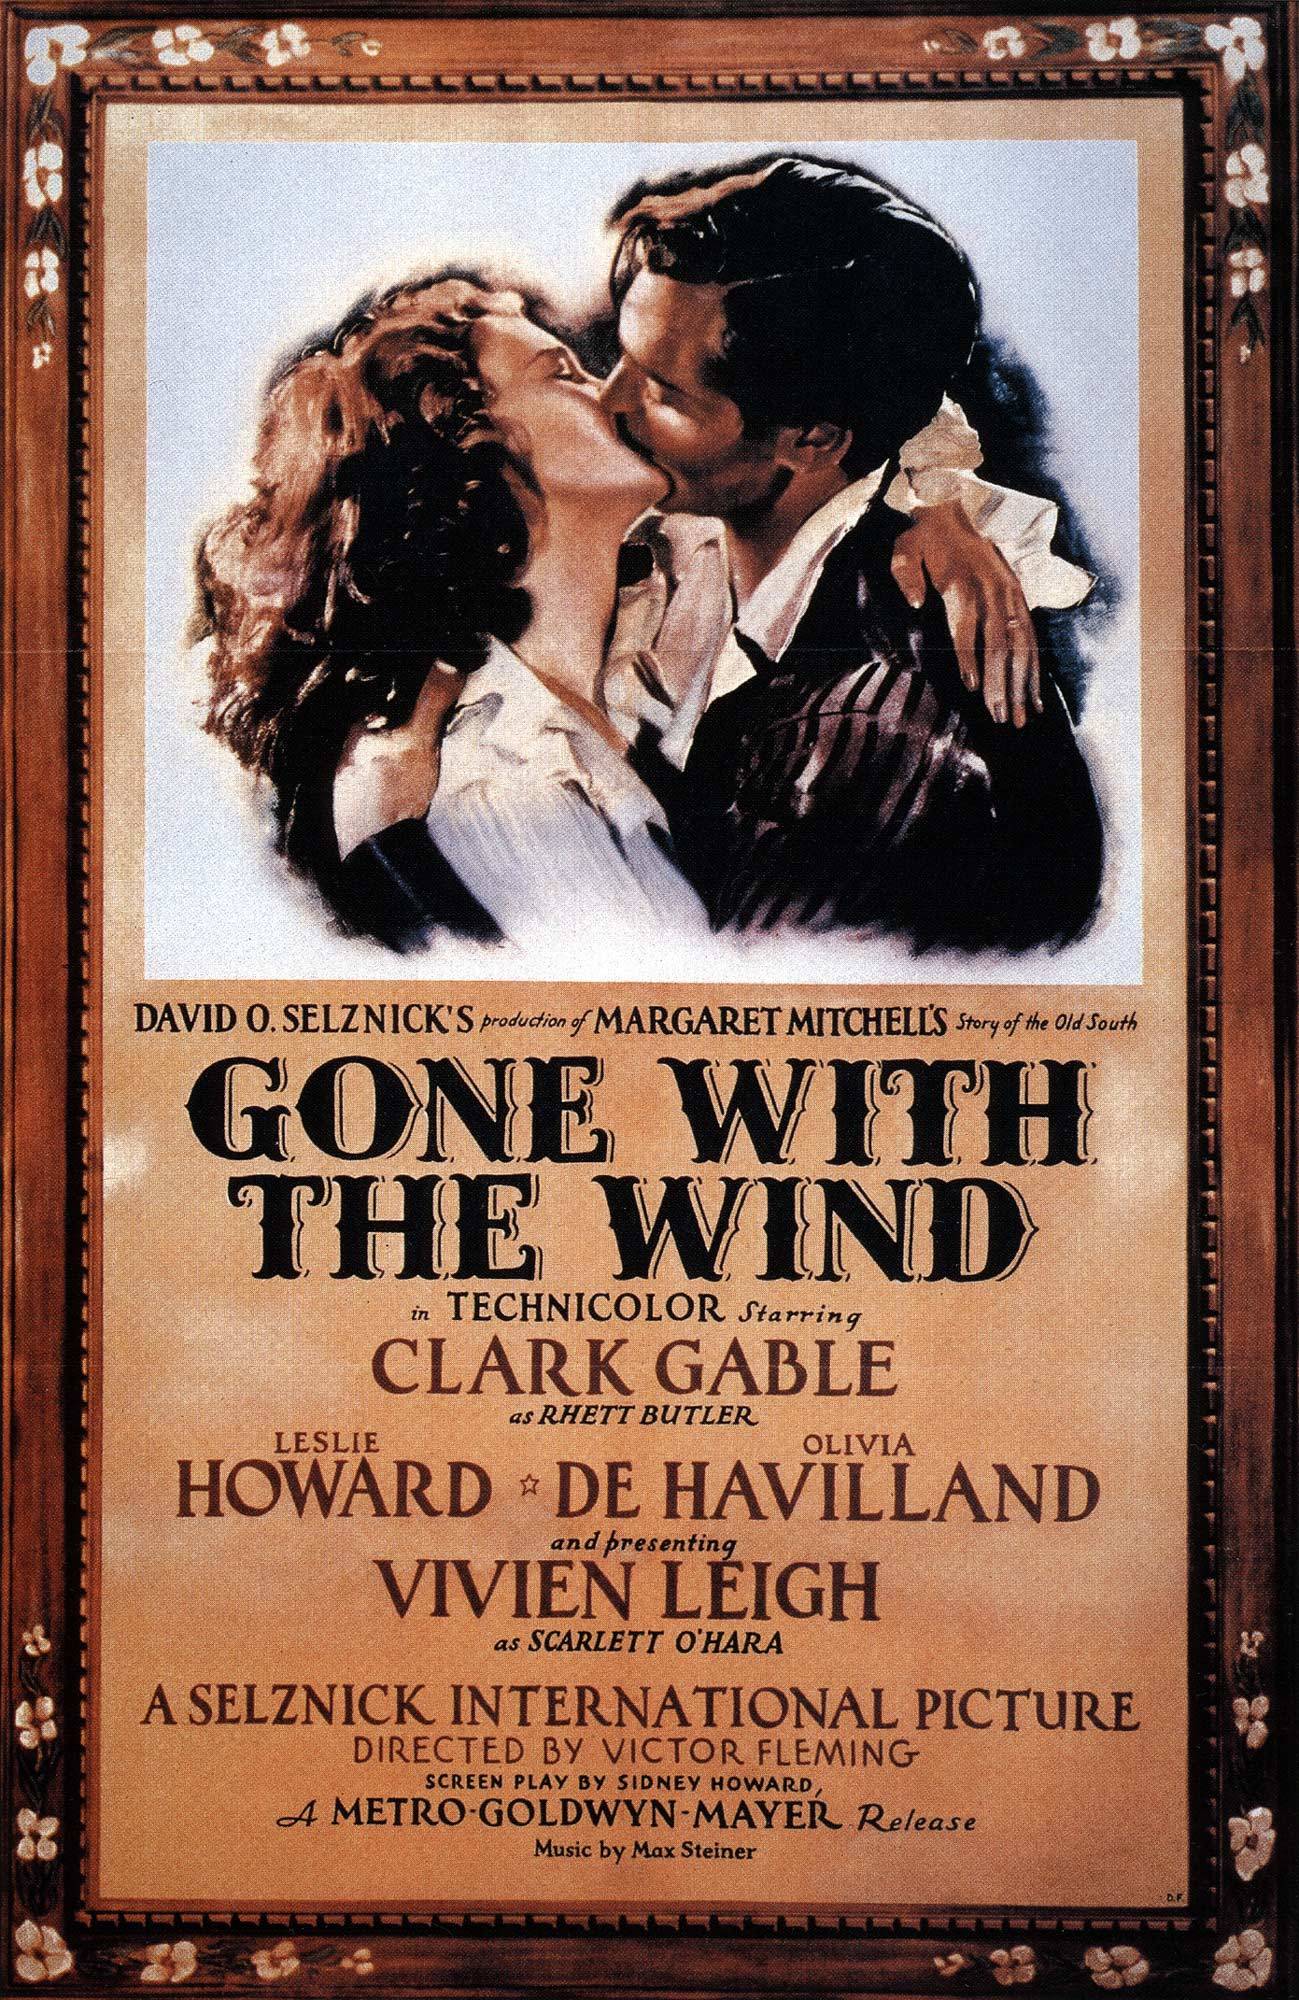 Movie poster of "Gone With the Wind"